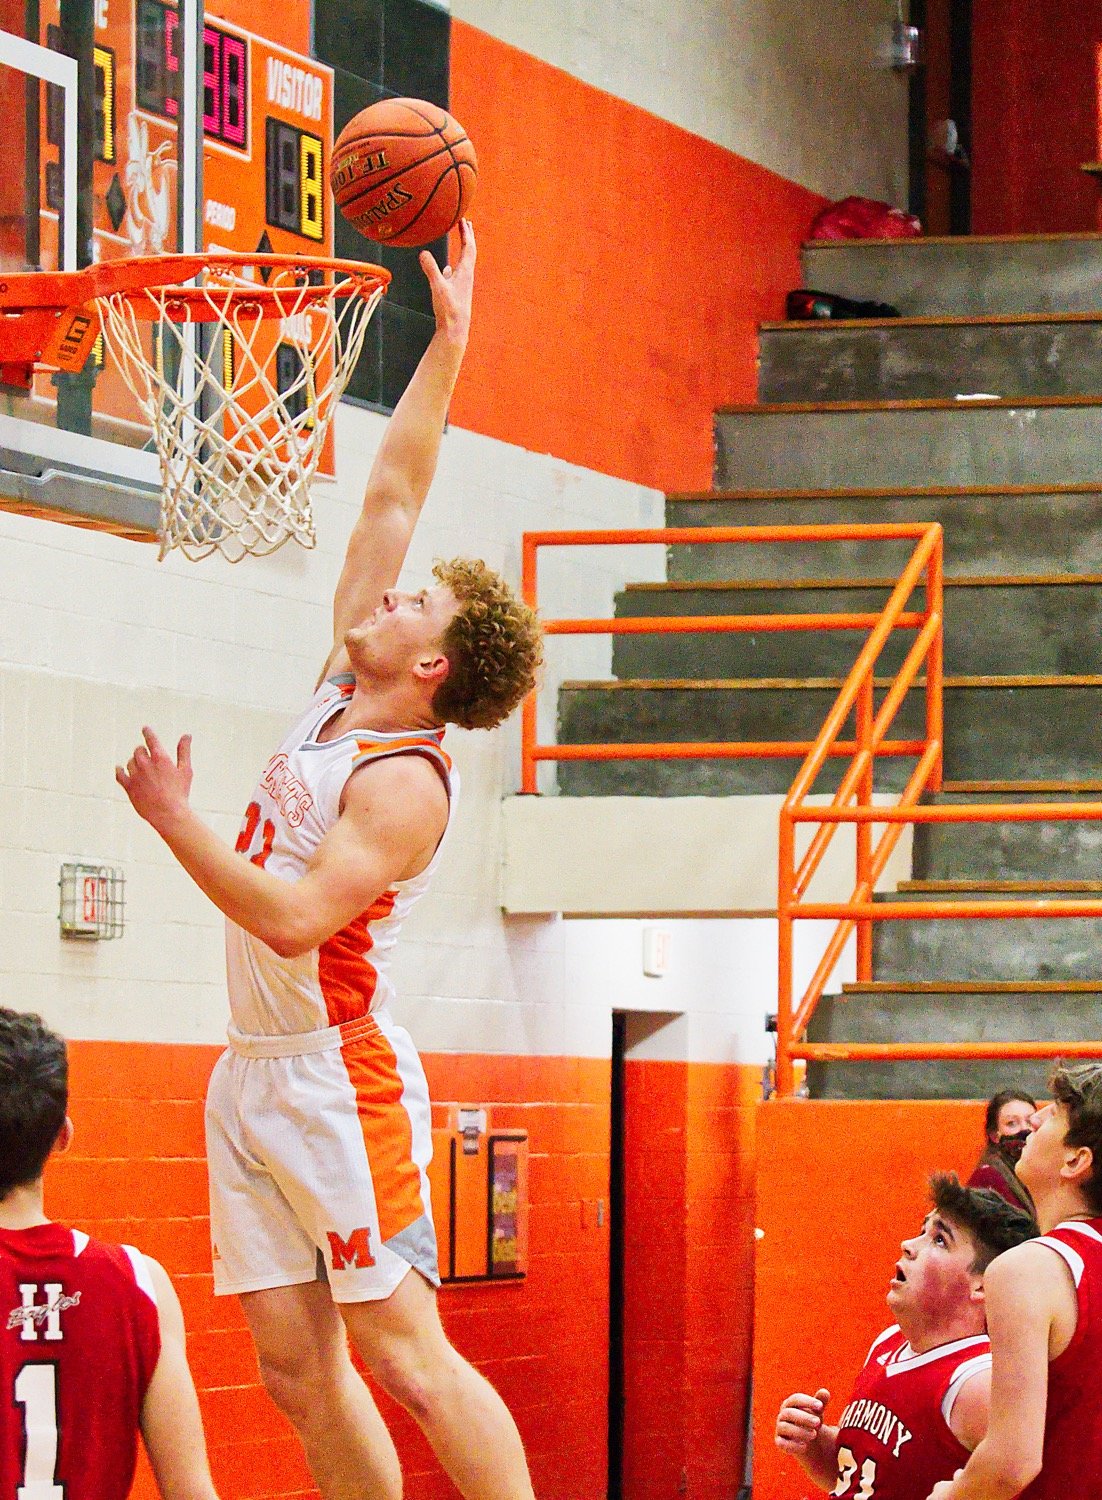 Dawson Pendergrass shows his leaping ability, making two of his dozen points look easy.